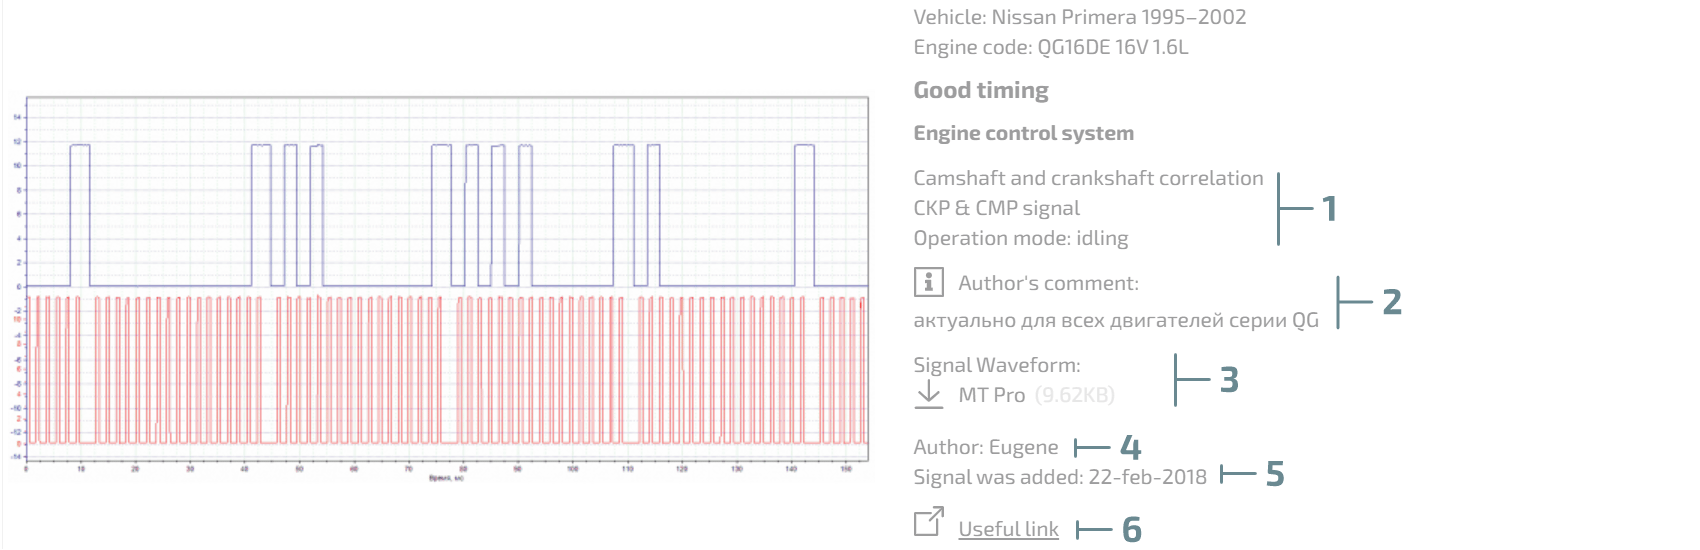 Automotive Waveform Library – the project updates